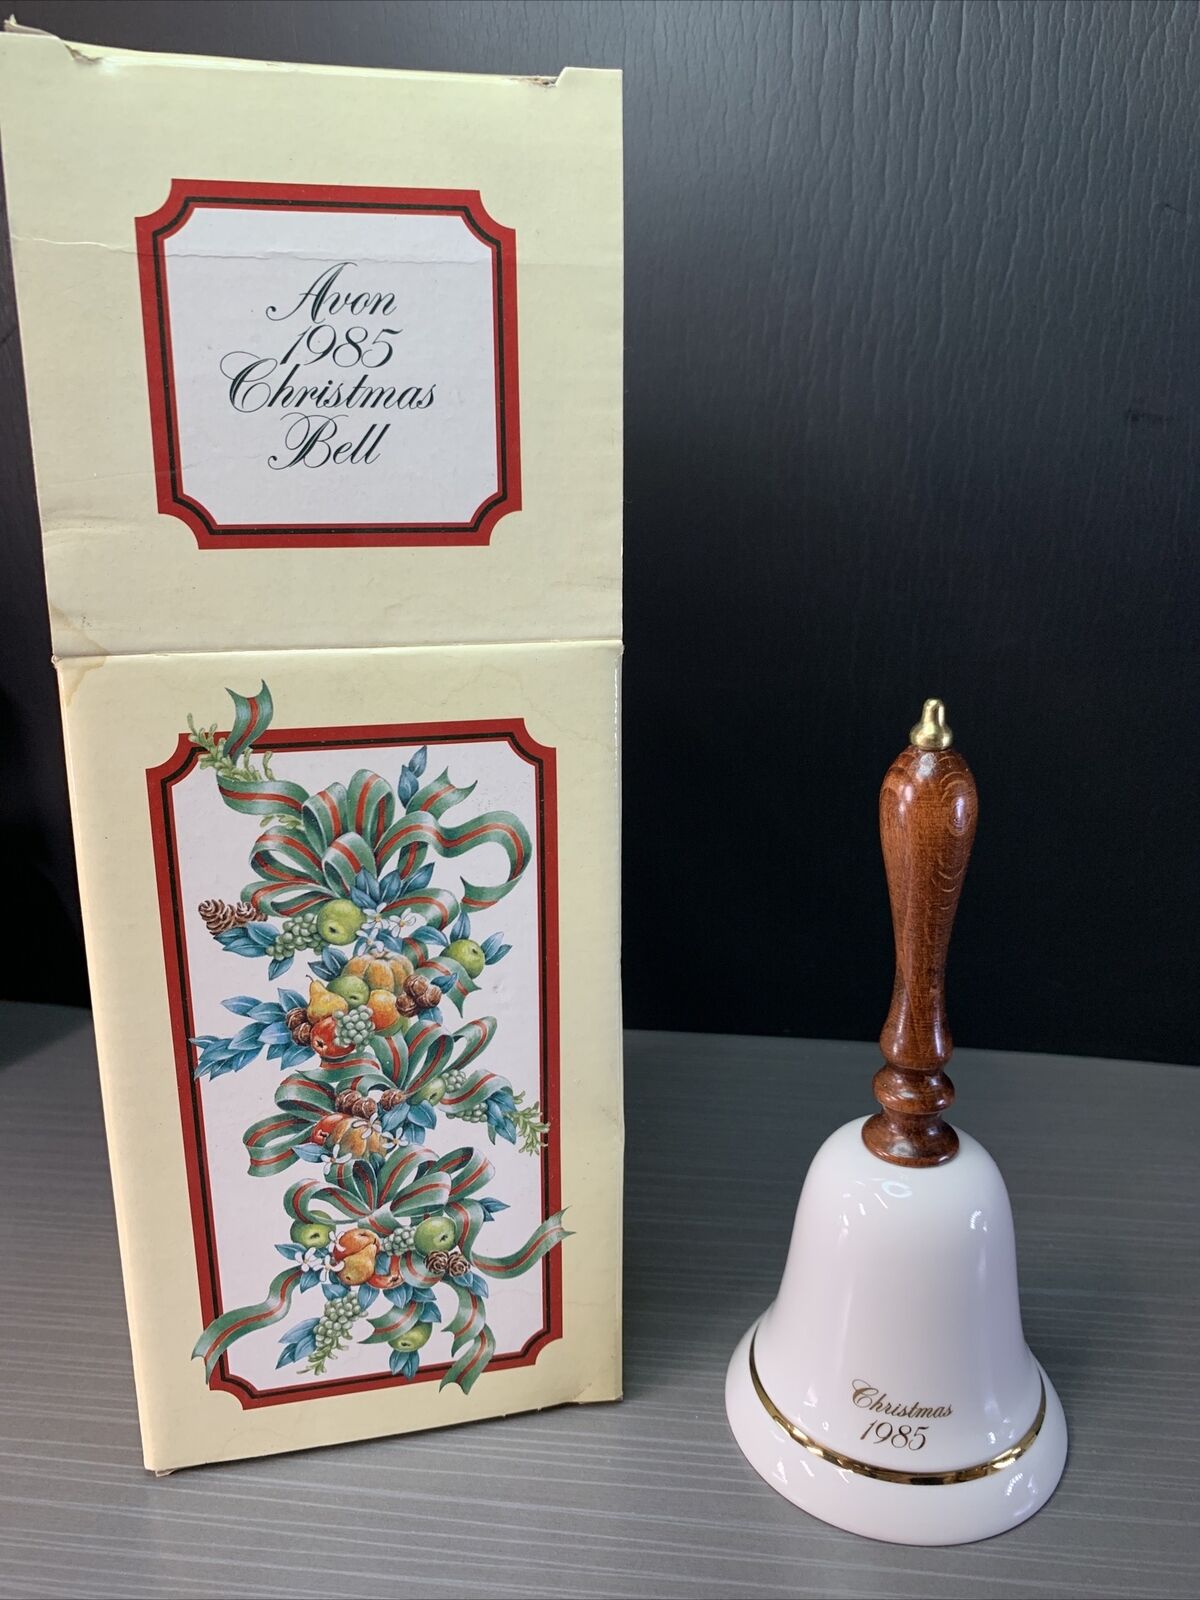 1985 Avon Christmas Bell Source Of Fine Collectibles Holiday Home Decor Display